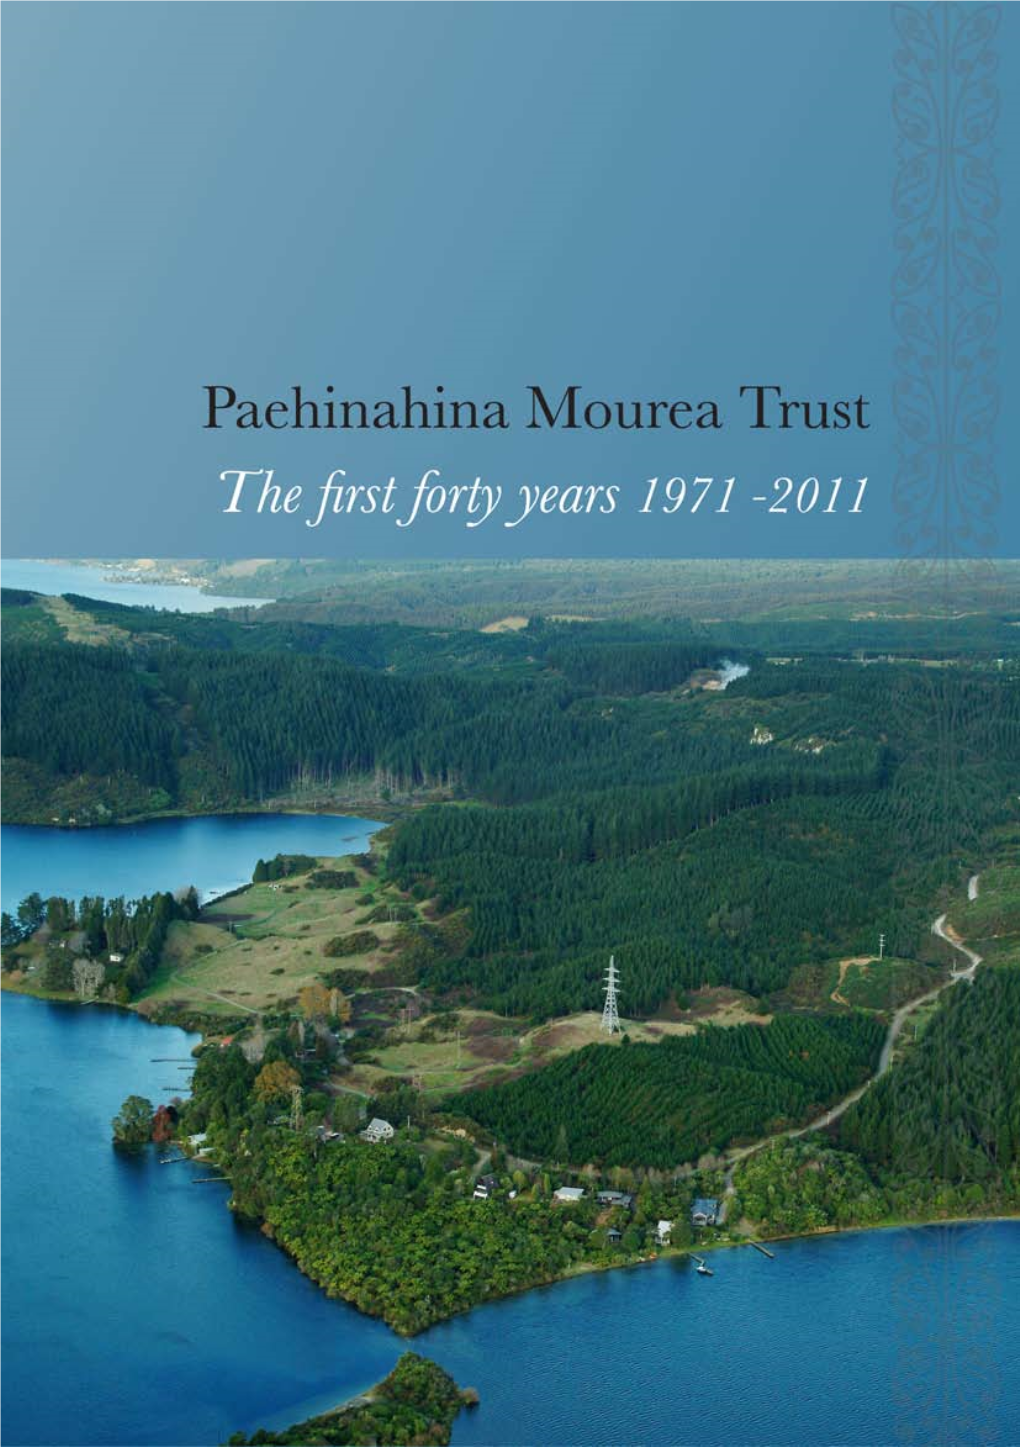 Paehinahina Mourea Trustees Would Like to Acknowledge the Following People Who Provided Information on the Beginnings of the Trust